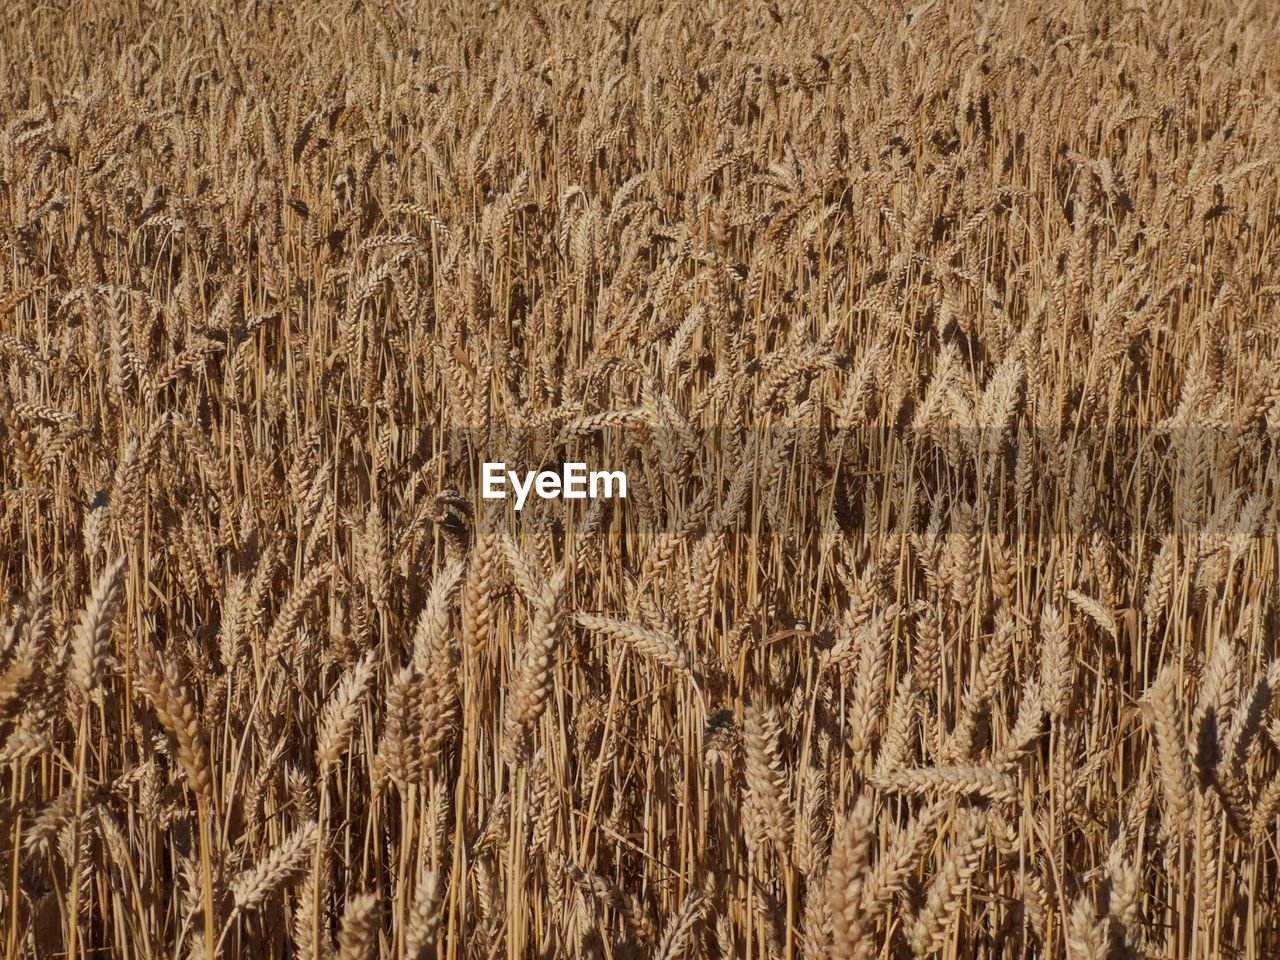 Full frame shot of wheat on agricultural field